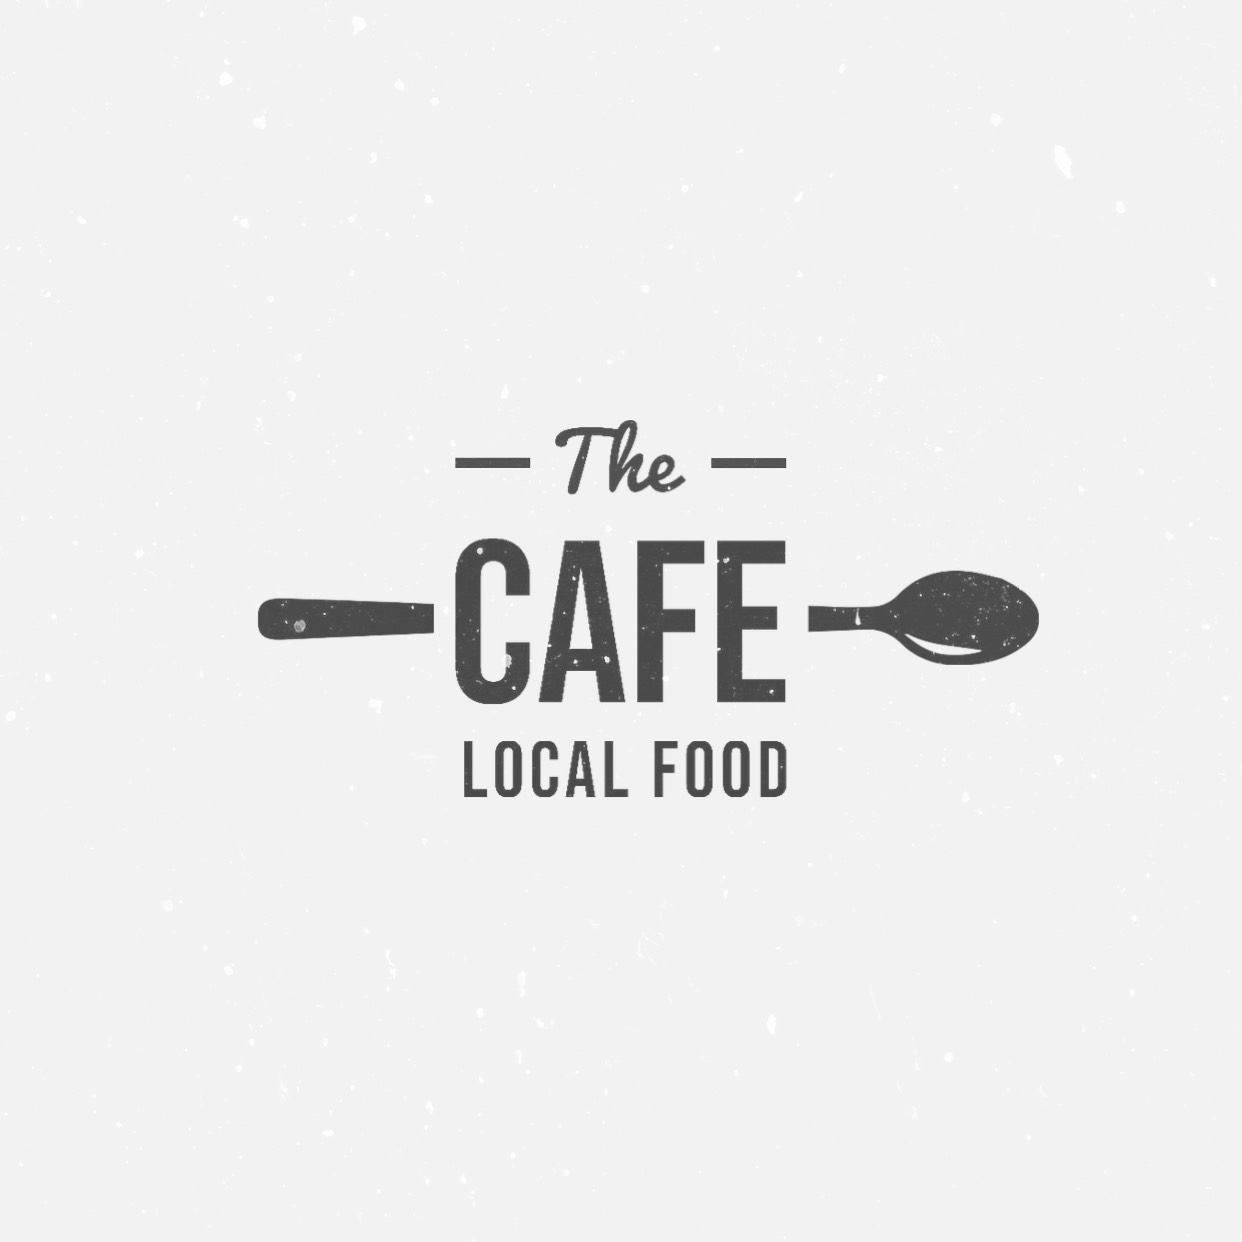 Spoon and local food restaurant logo template